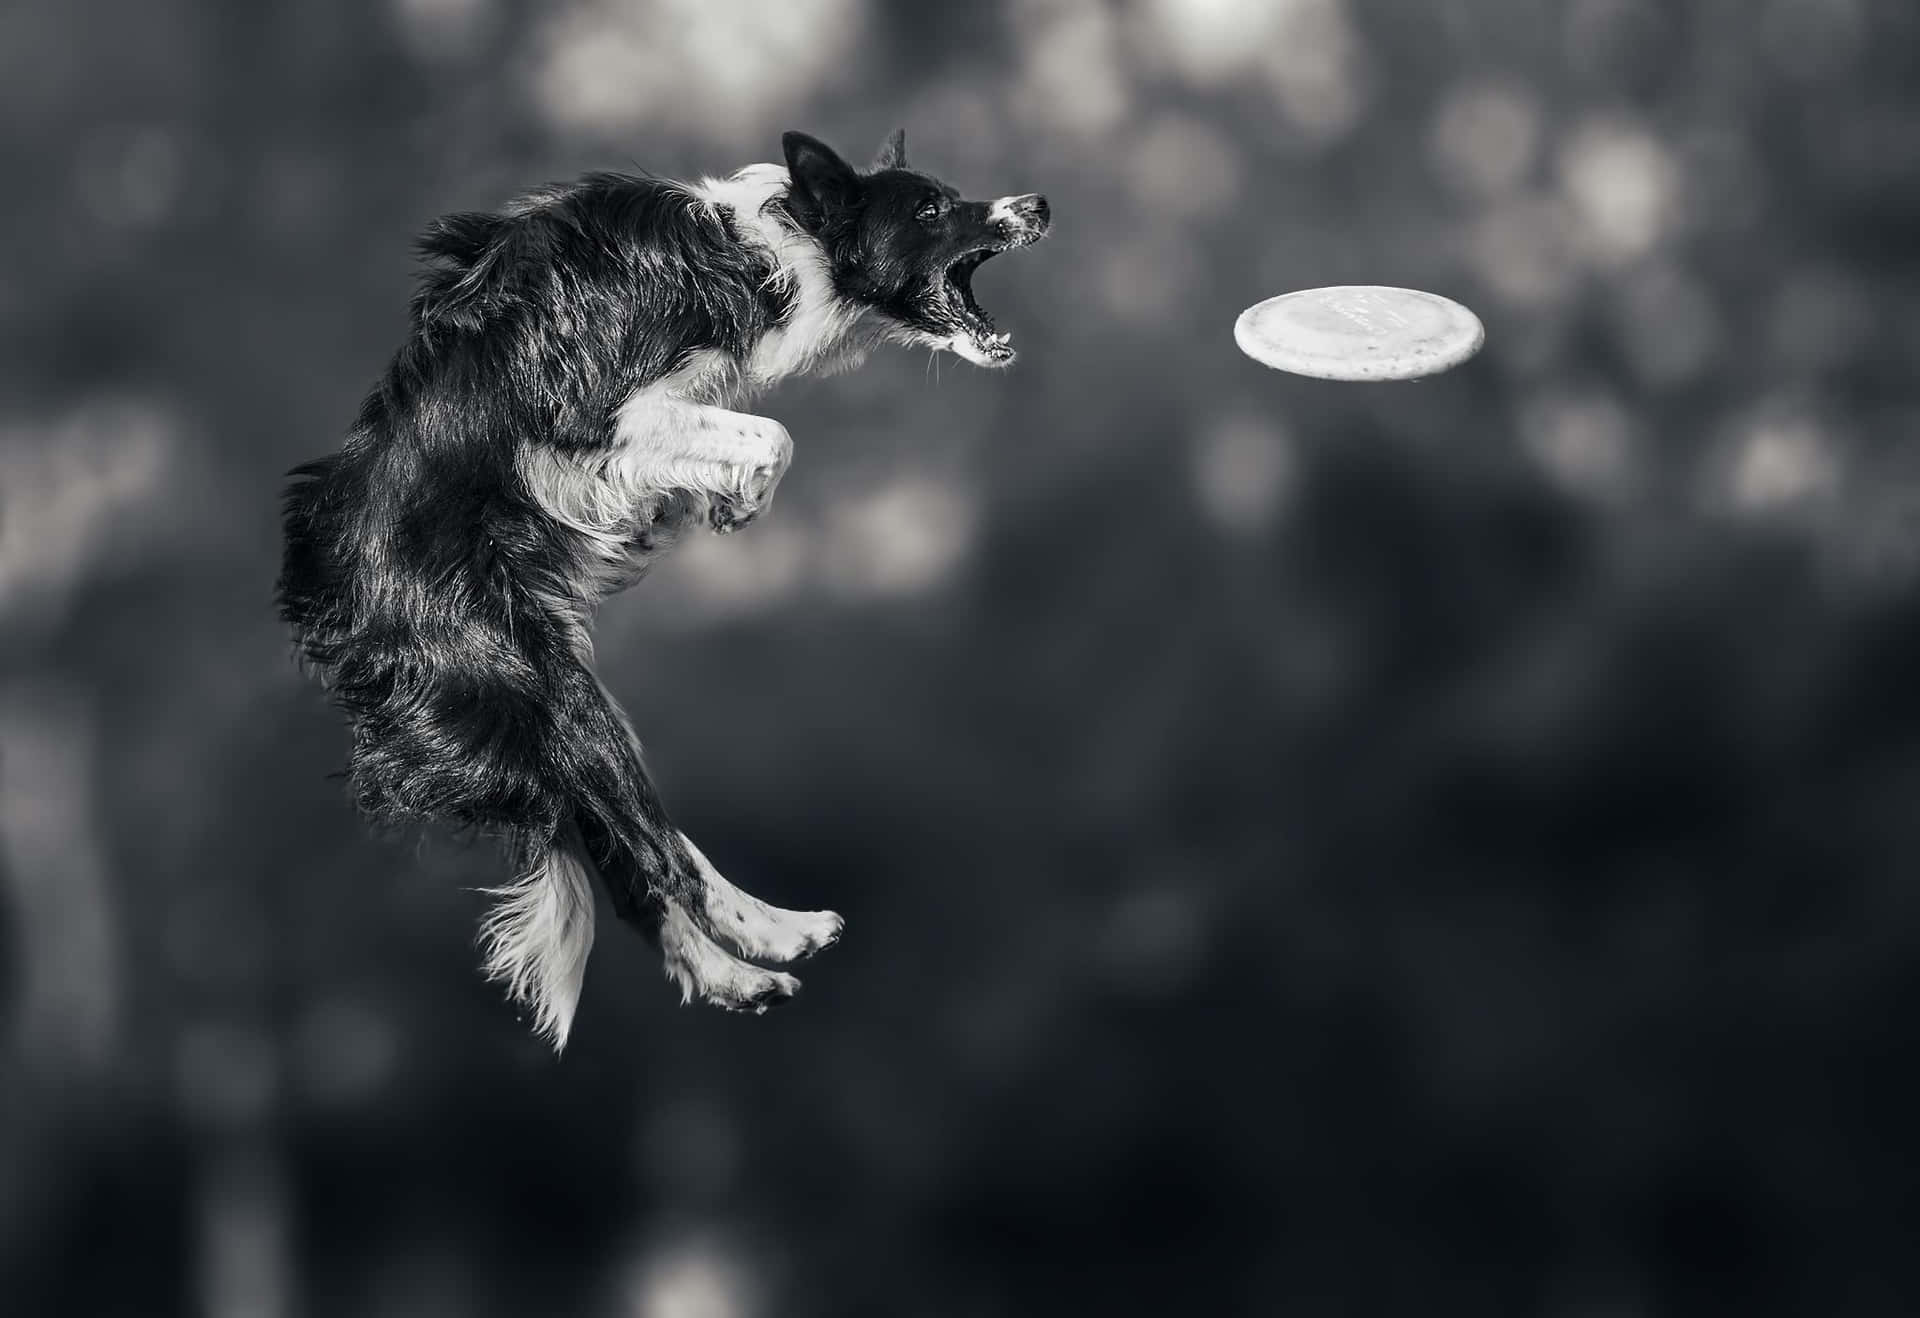 A Dog Jumping Up To Catch A Frisbee